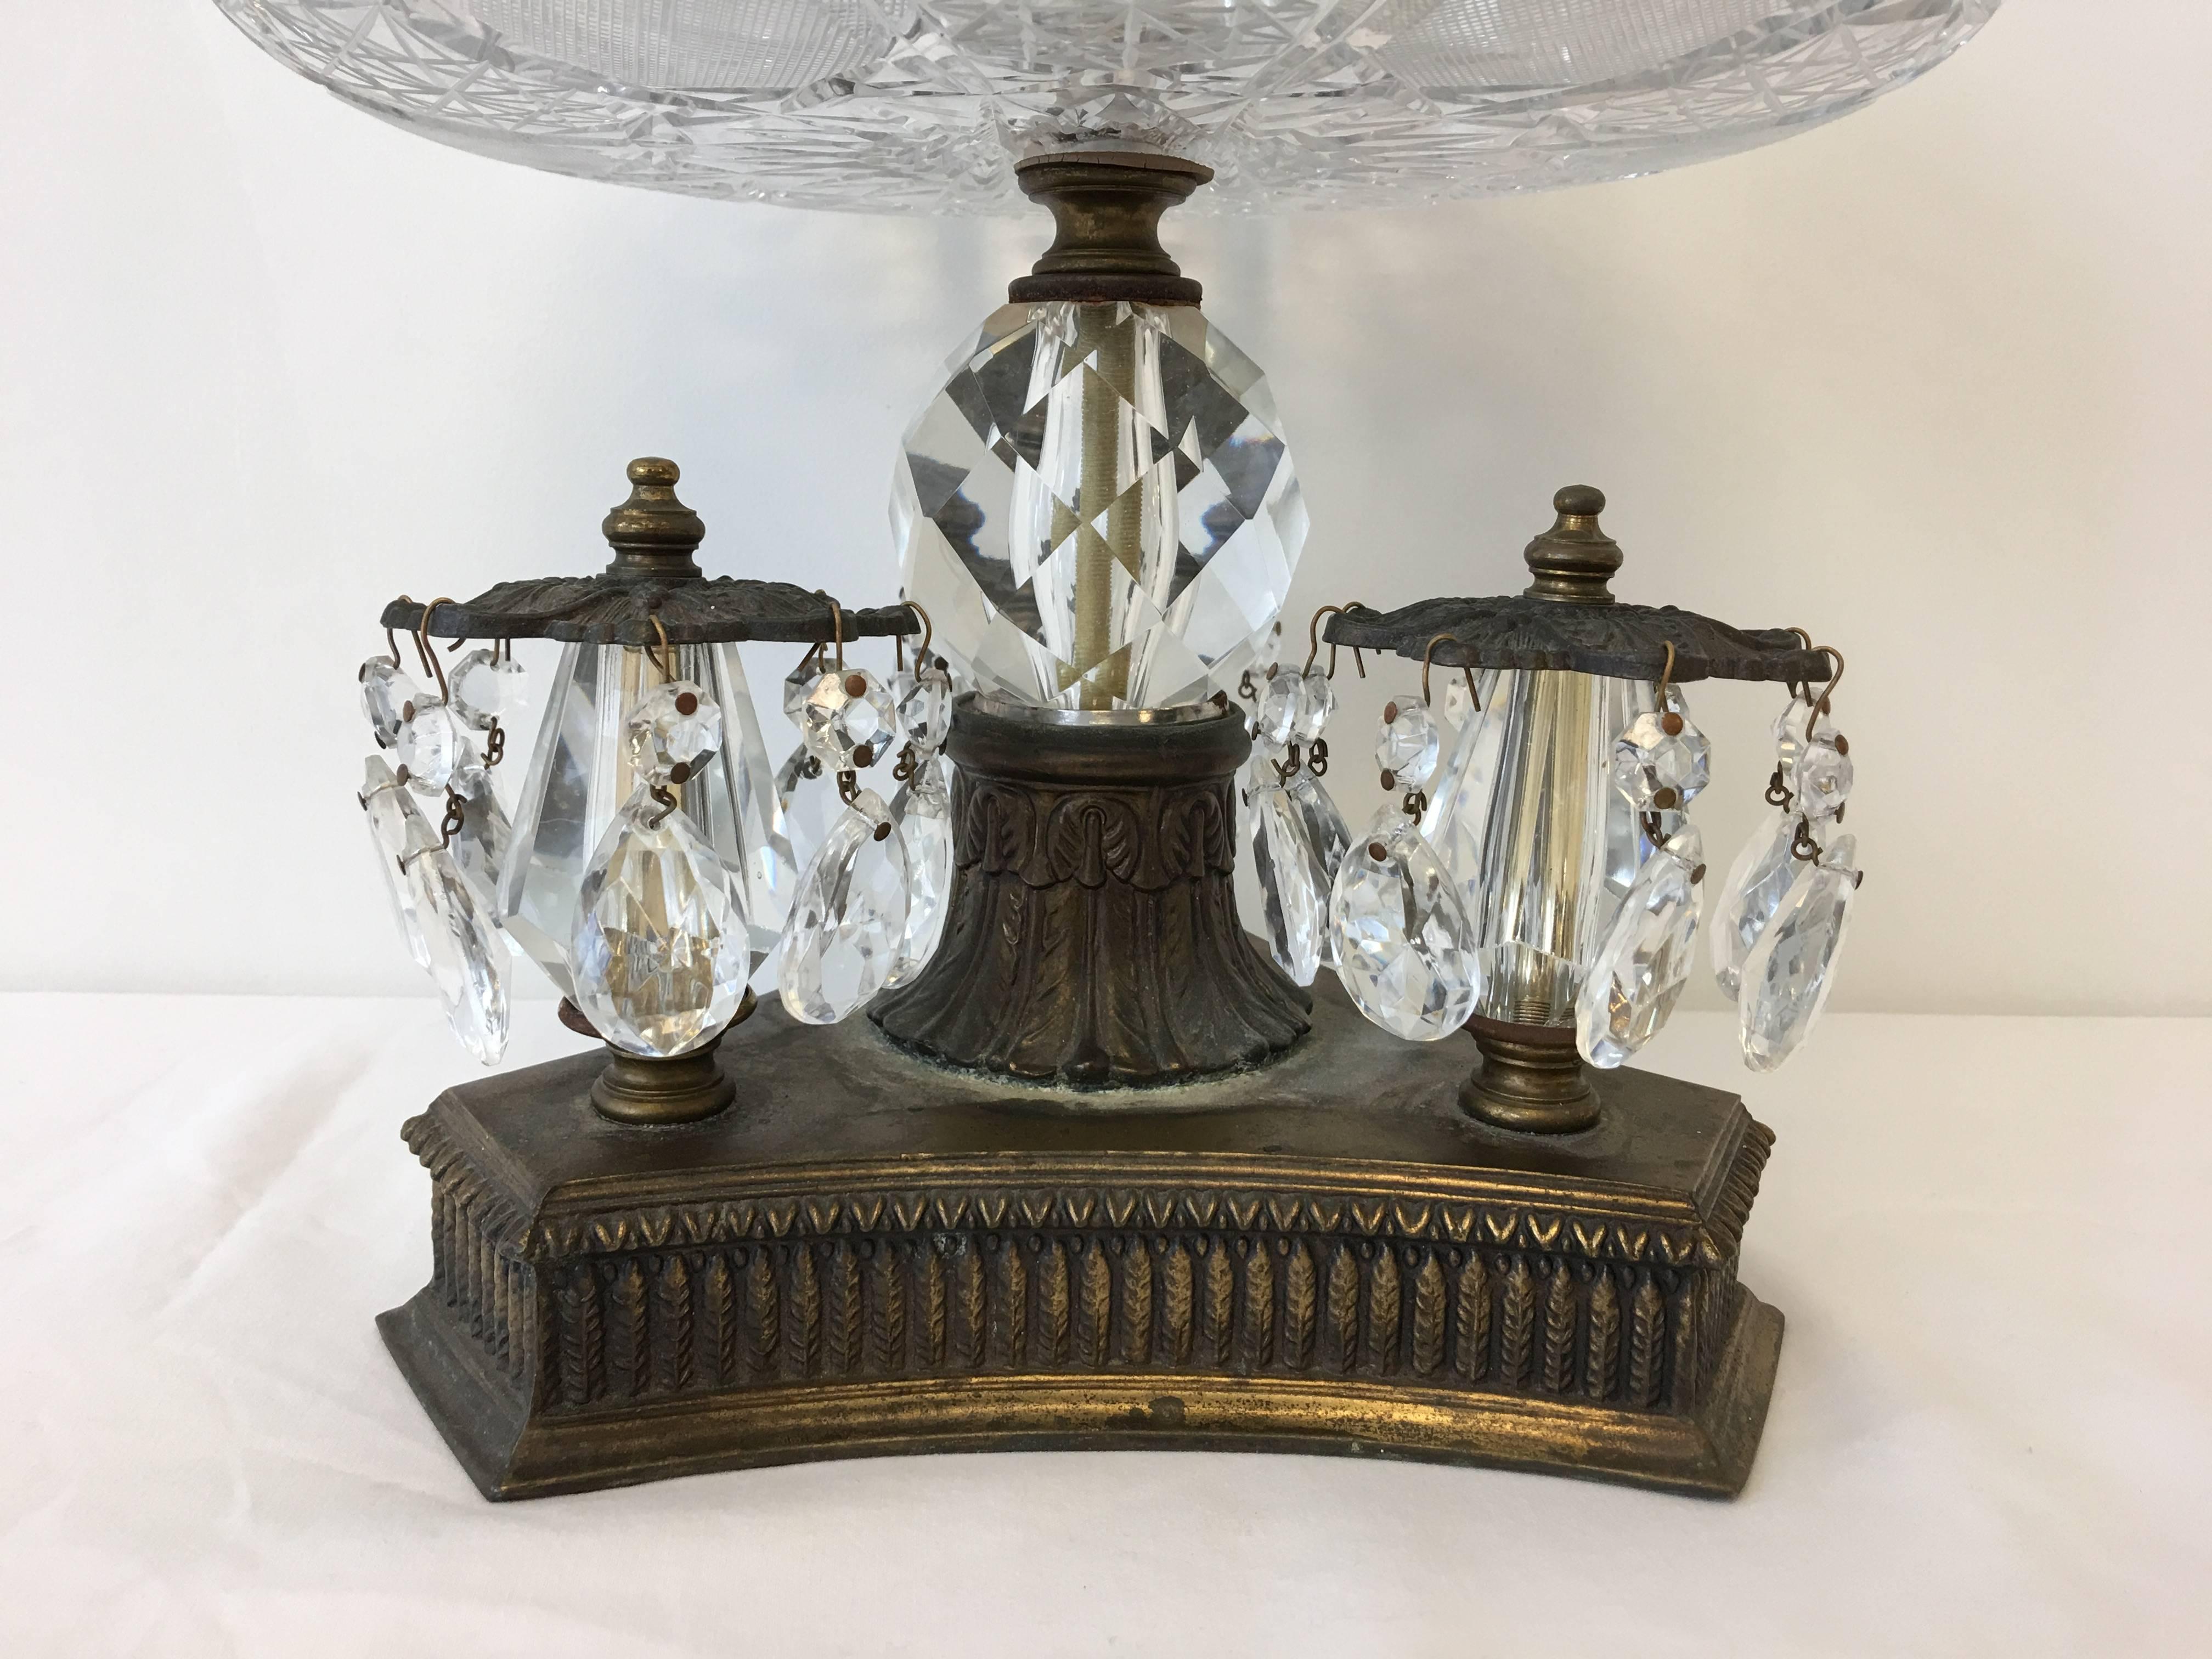 19th Century Art Nouveau Large Crystal and Bronze Compote Bowl In Good Condition For Sale In Richmond, VA